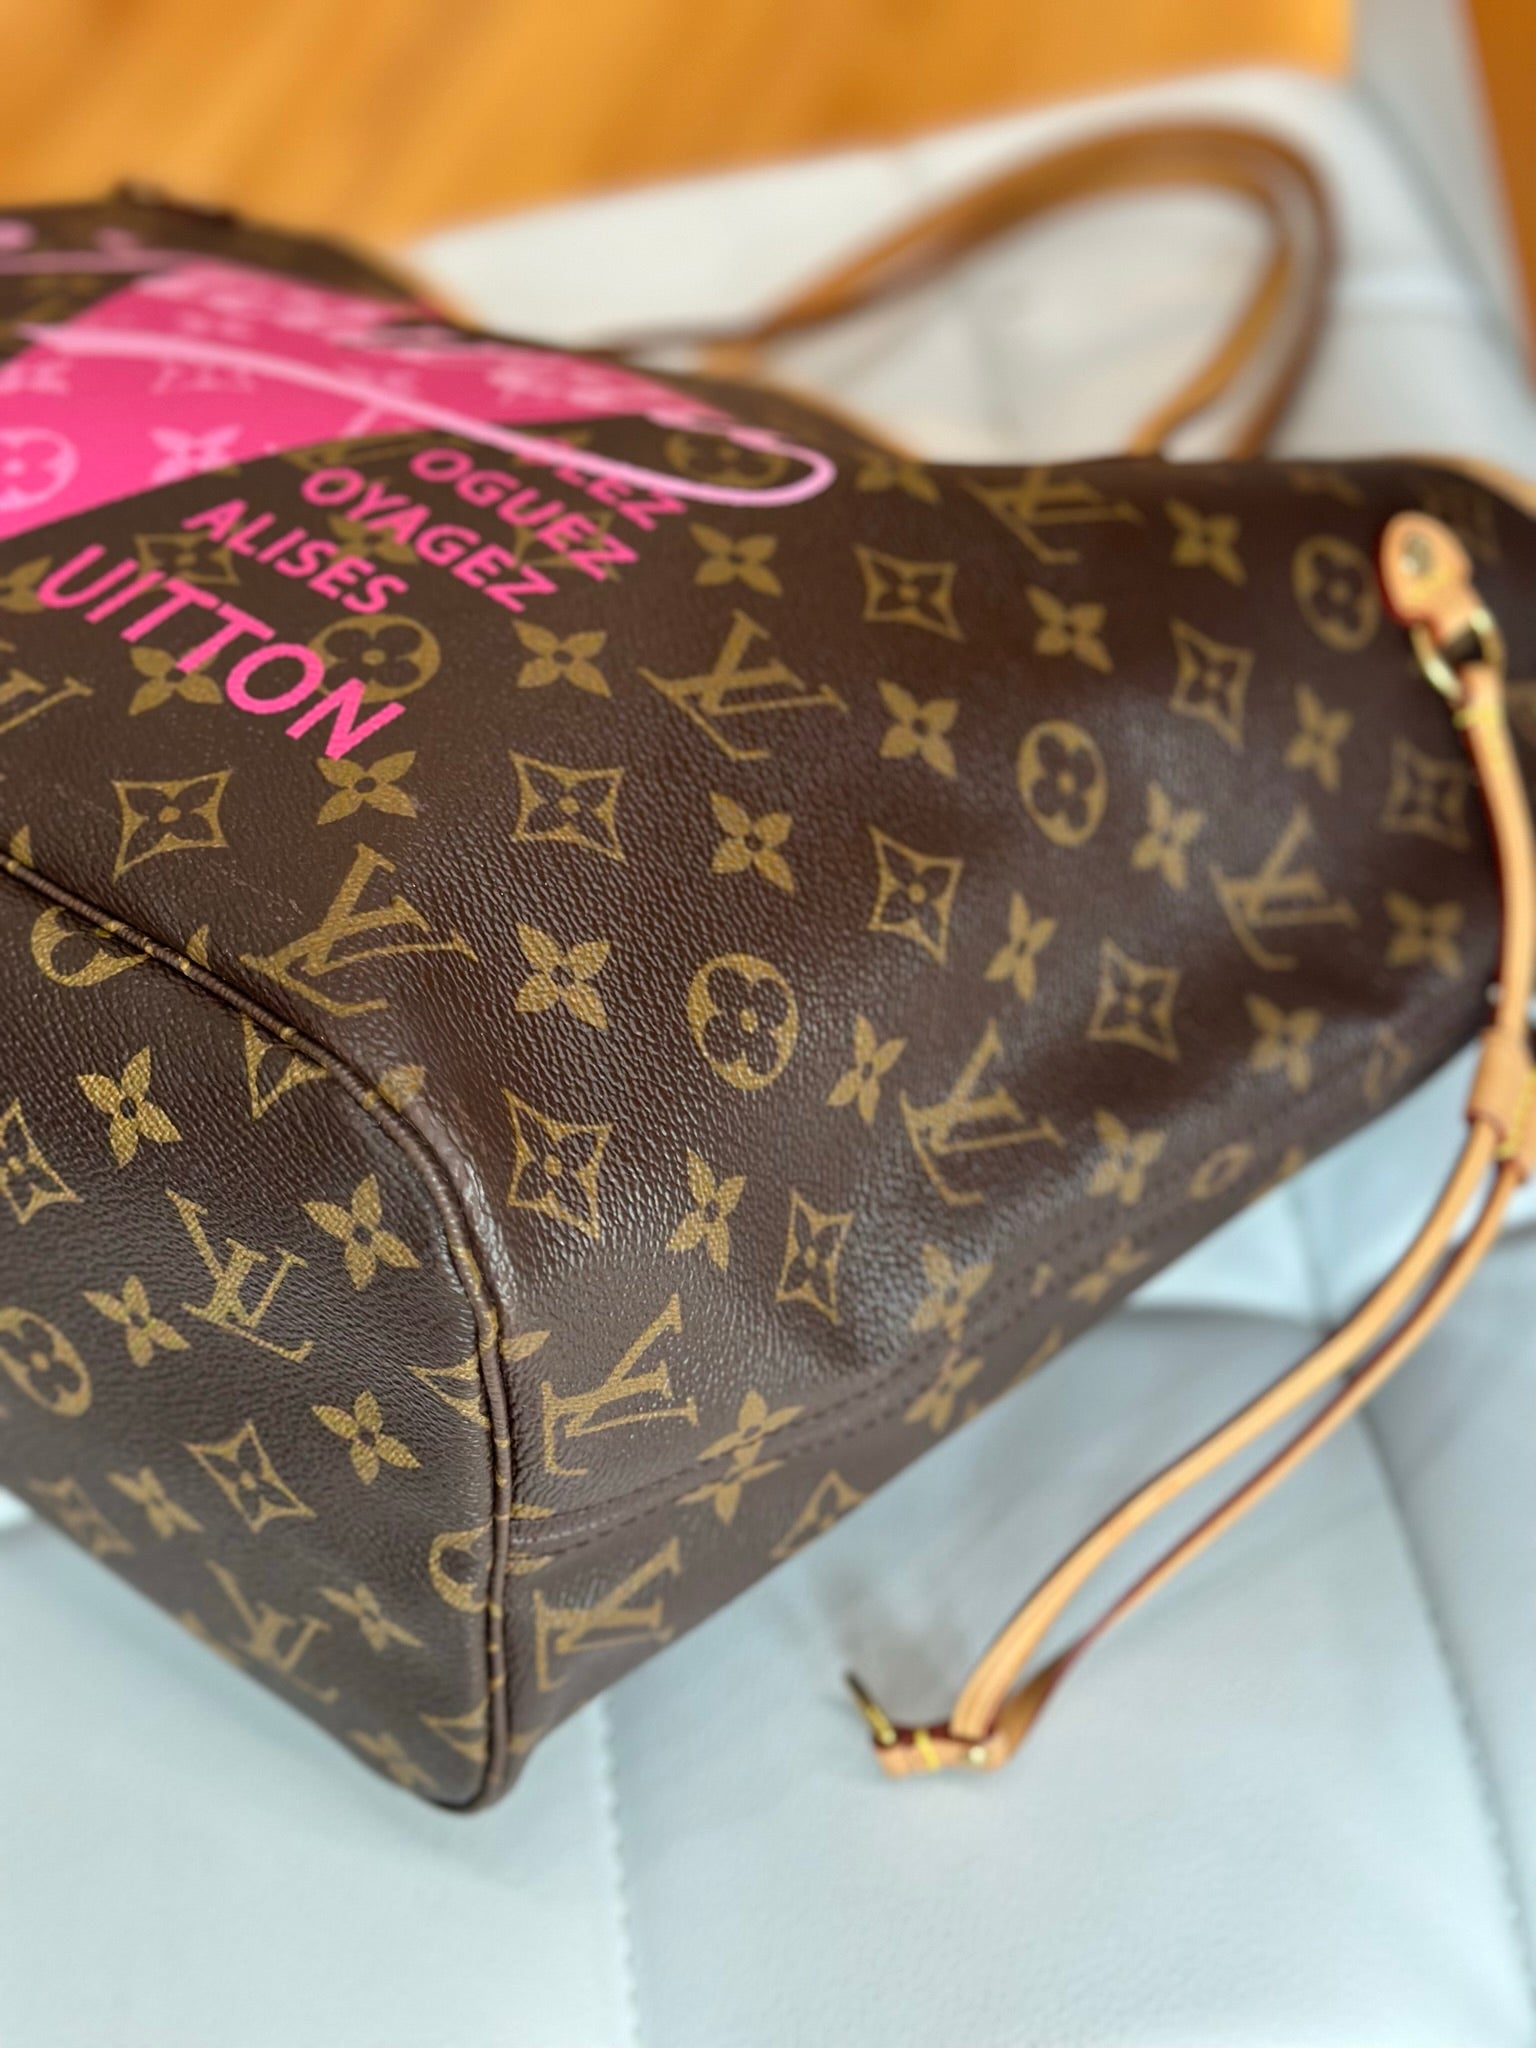 Neverfull GM $1480 & 4% sales tax bought today - go to the LV at the Hilton  instead of waiting at other Honolulu locations😉 : r/Louisvuitton